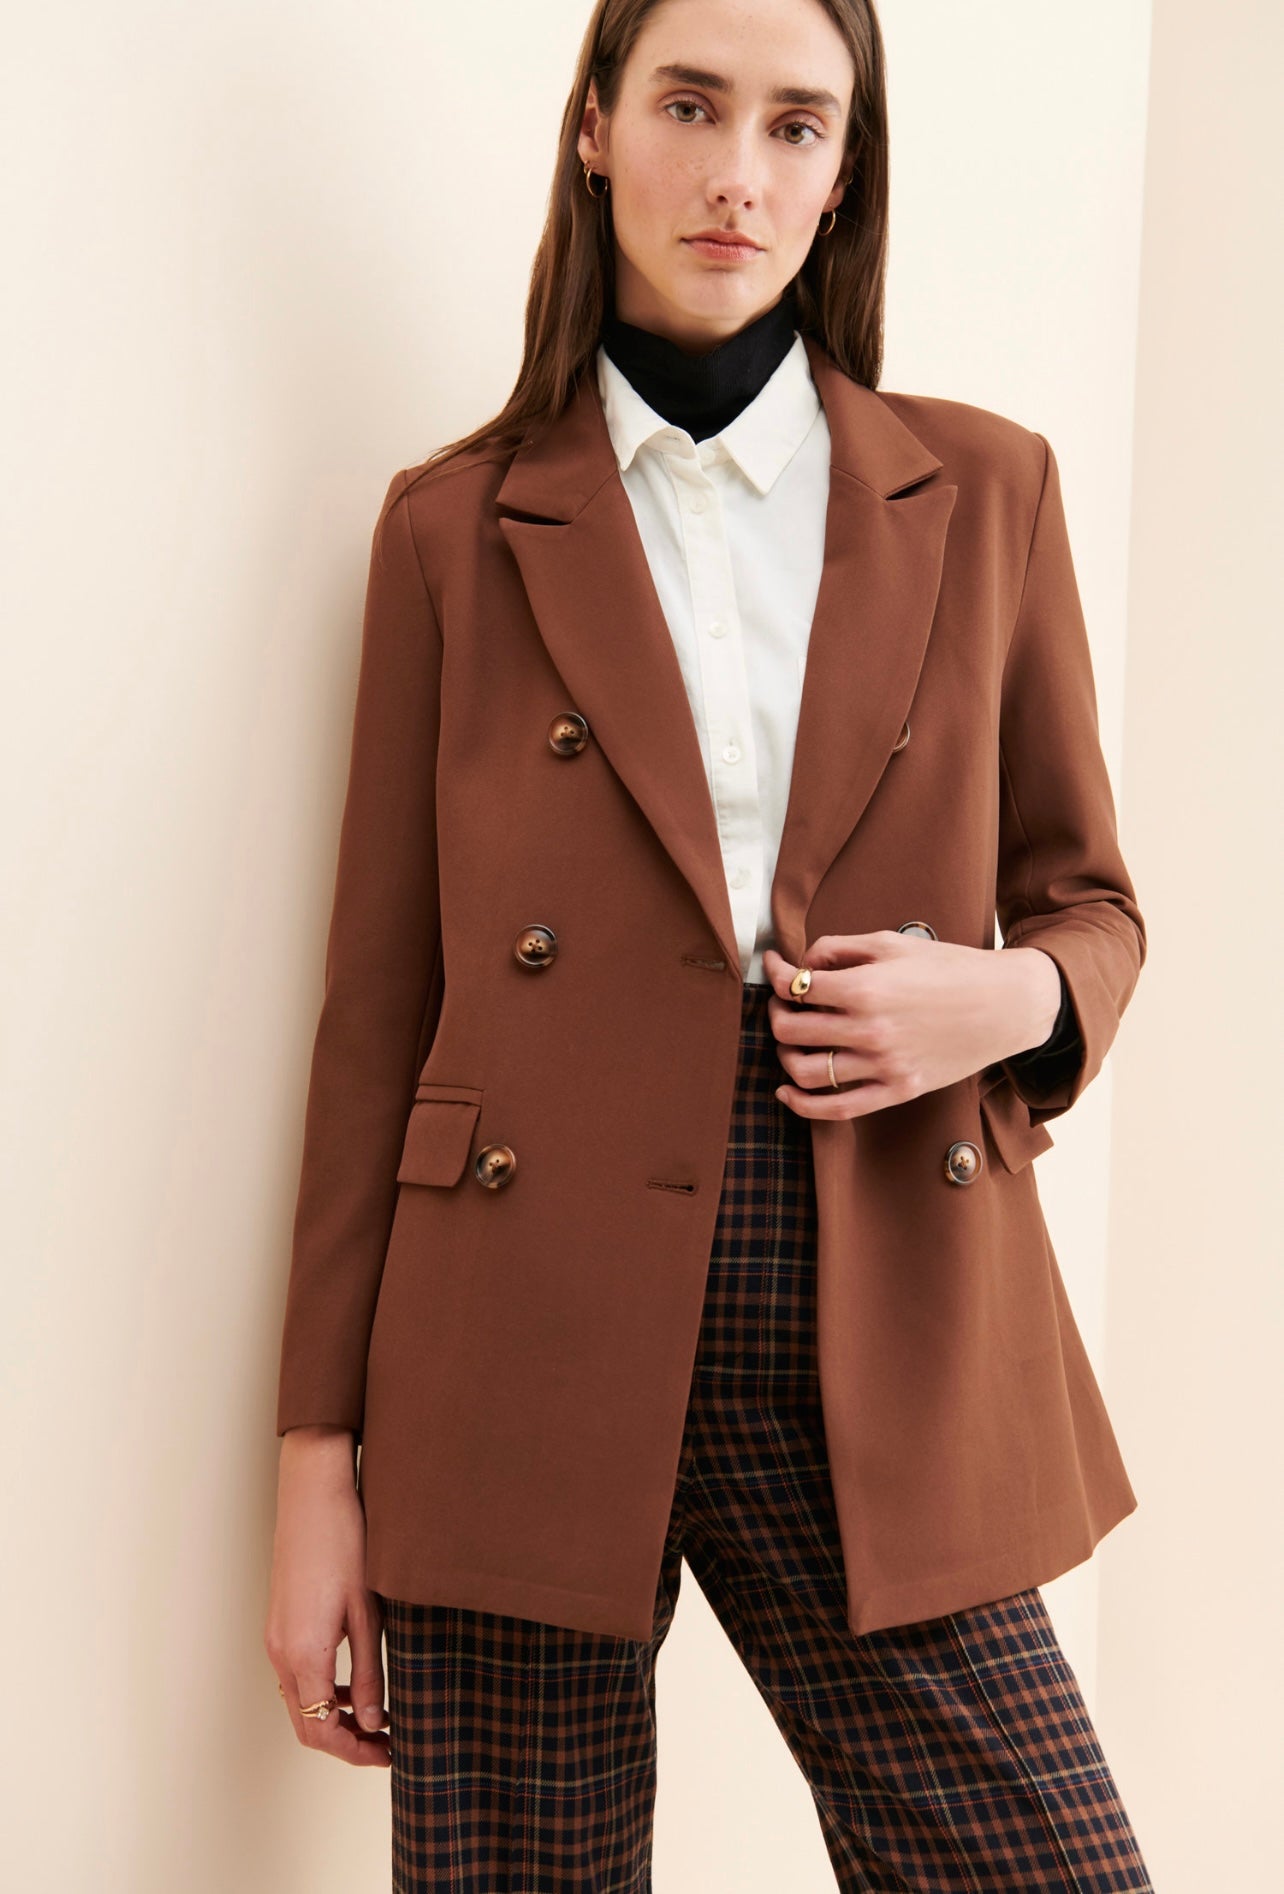 Brown Wool Classic Double Breasted Staple Jacket Women's Workwear Office Wear Women's Fashion Sophisticated Style Chic Simple Classic Brown Blazer Fall Jacket Fall Fashion Women's Outerwear Timeless Everyday Blazer Neutral Color The Emory Blazer In Brown